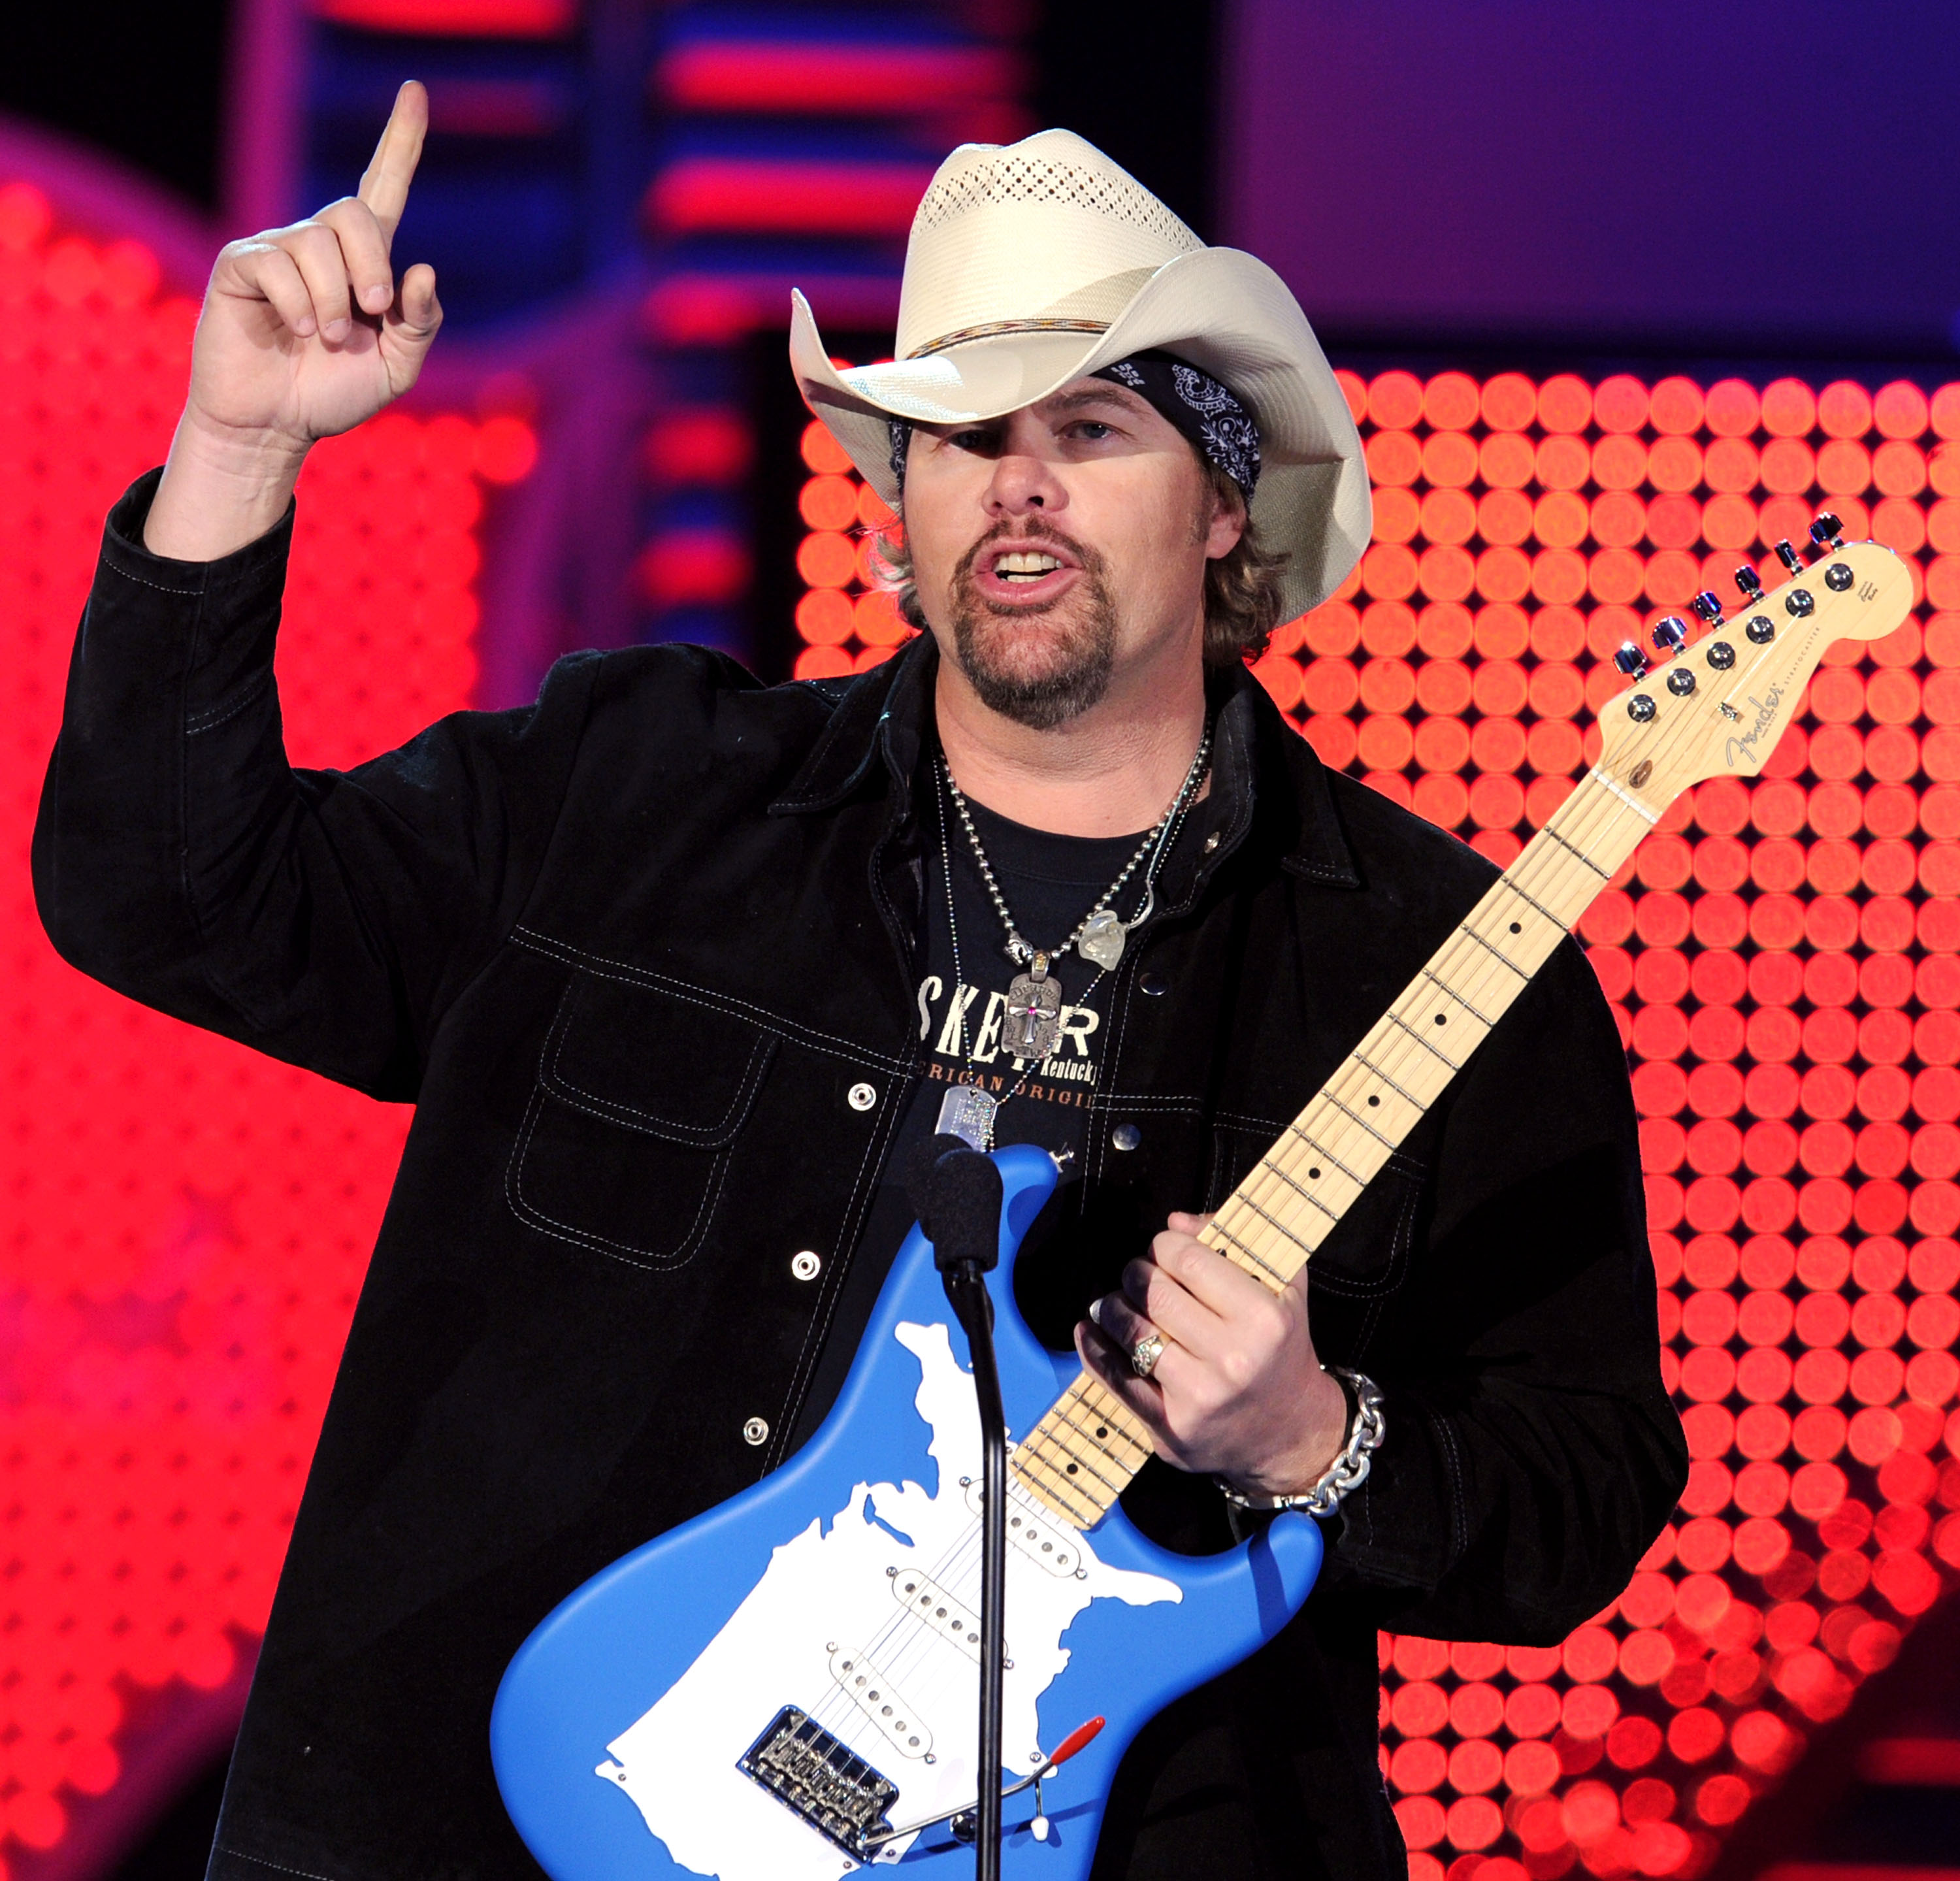 Toby Keith performs during the American Country Awards 2010 on December 6, 2010 in Las Vegas, Nevada | Source: Getty Images